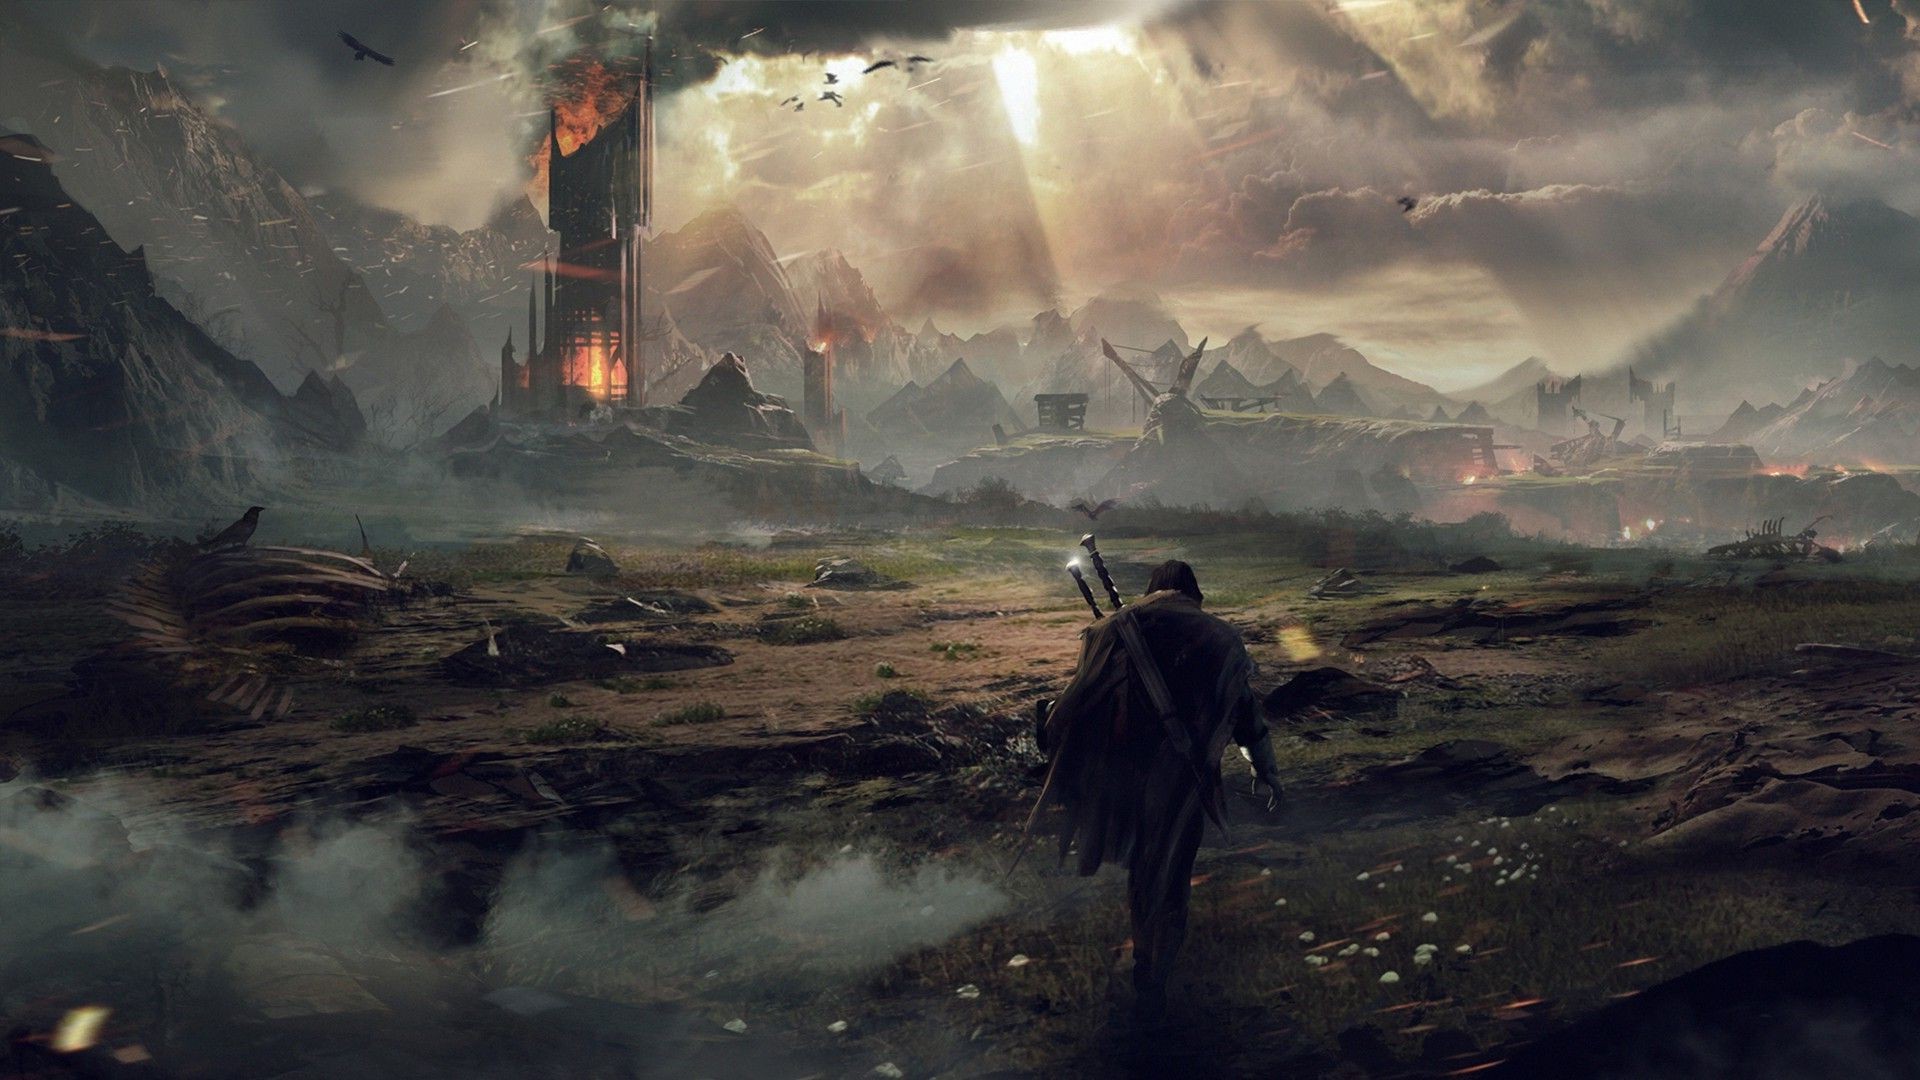 Middle earth : Shadow Of Mordor, Shadow Of Mordor, Video Games, Fantasy Art, The Lord Of The Rings, Mordor Wallpaper